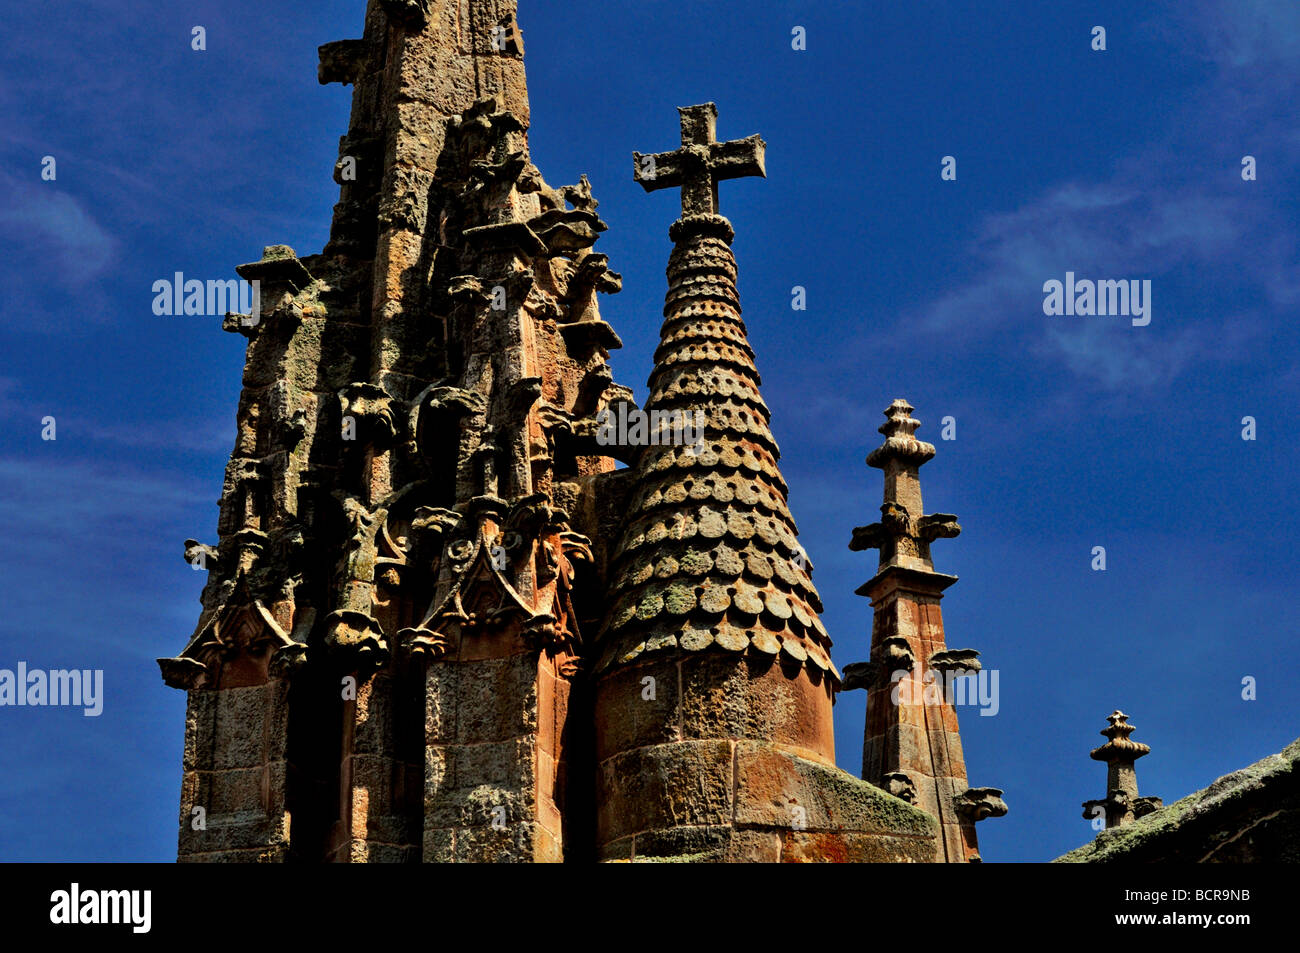 Spain, Castilla-Leon: Architectonical detail of the top of the Cathedrals of Salamanca Stock Photo